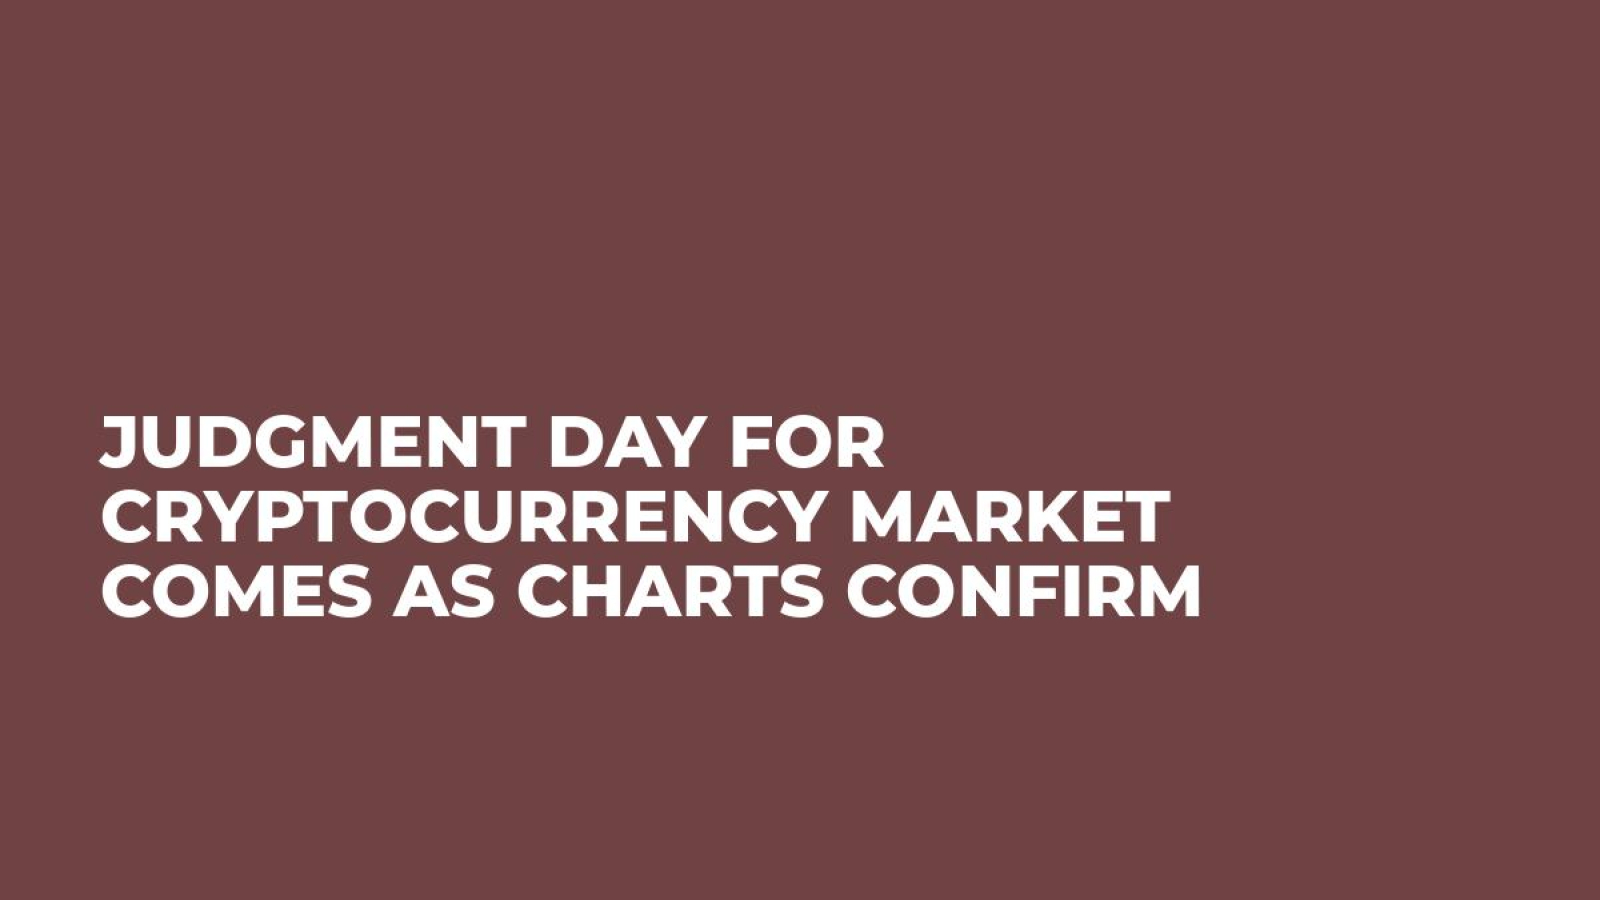 Judgment Day for Cryptocurrency Market Comes As Charts Confirm